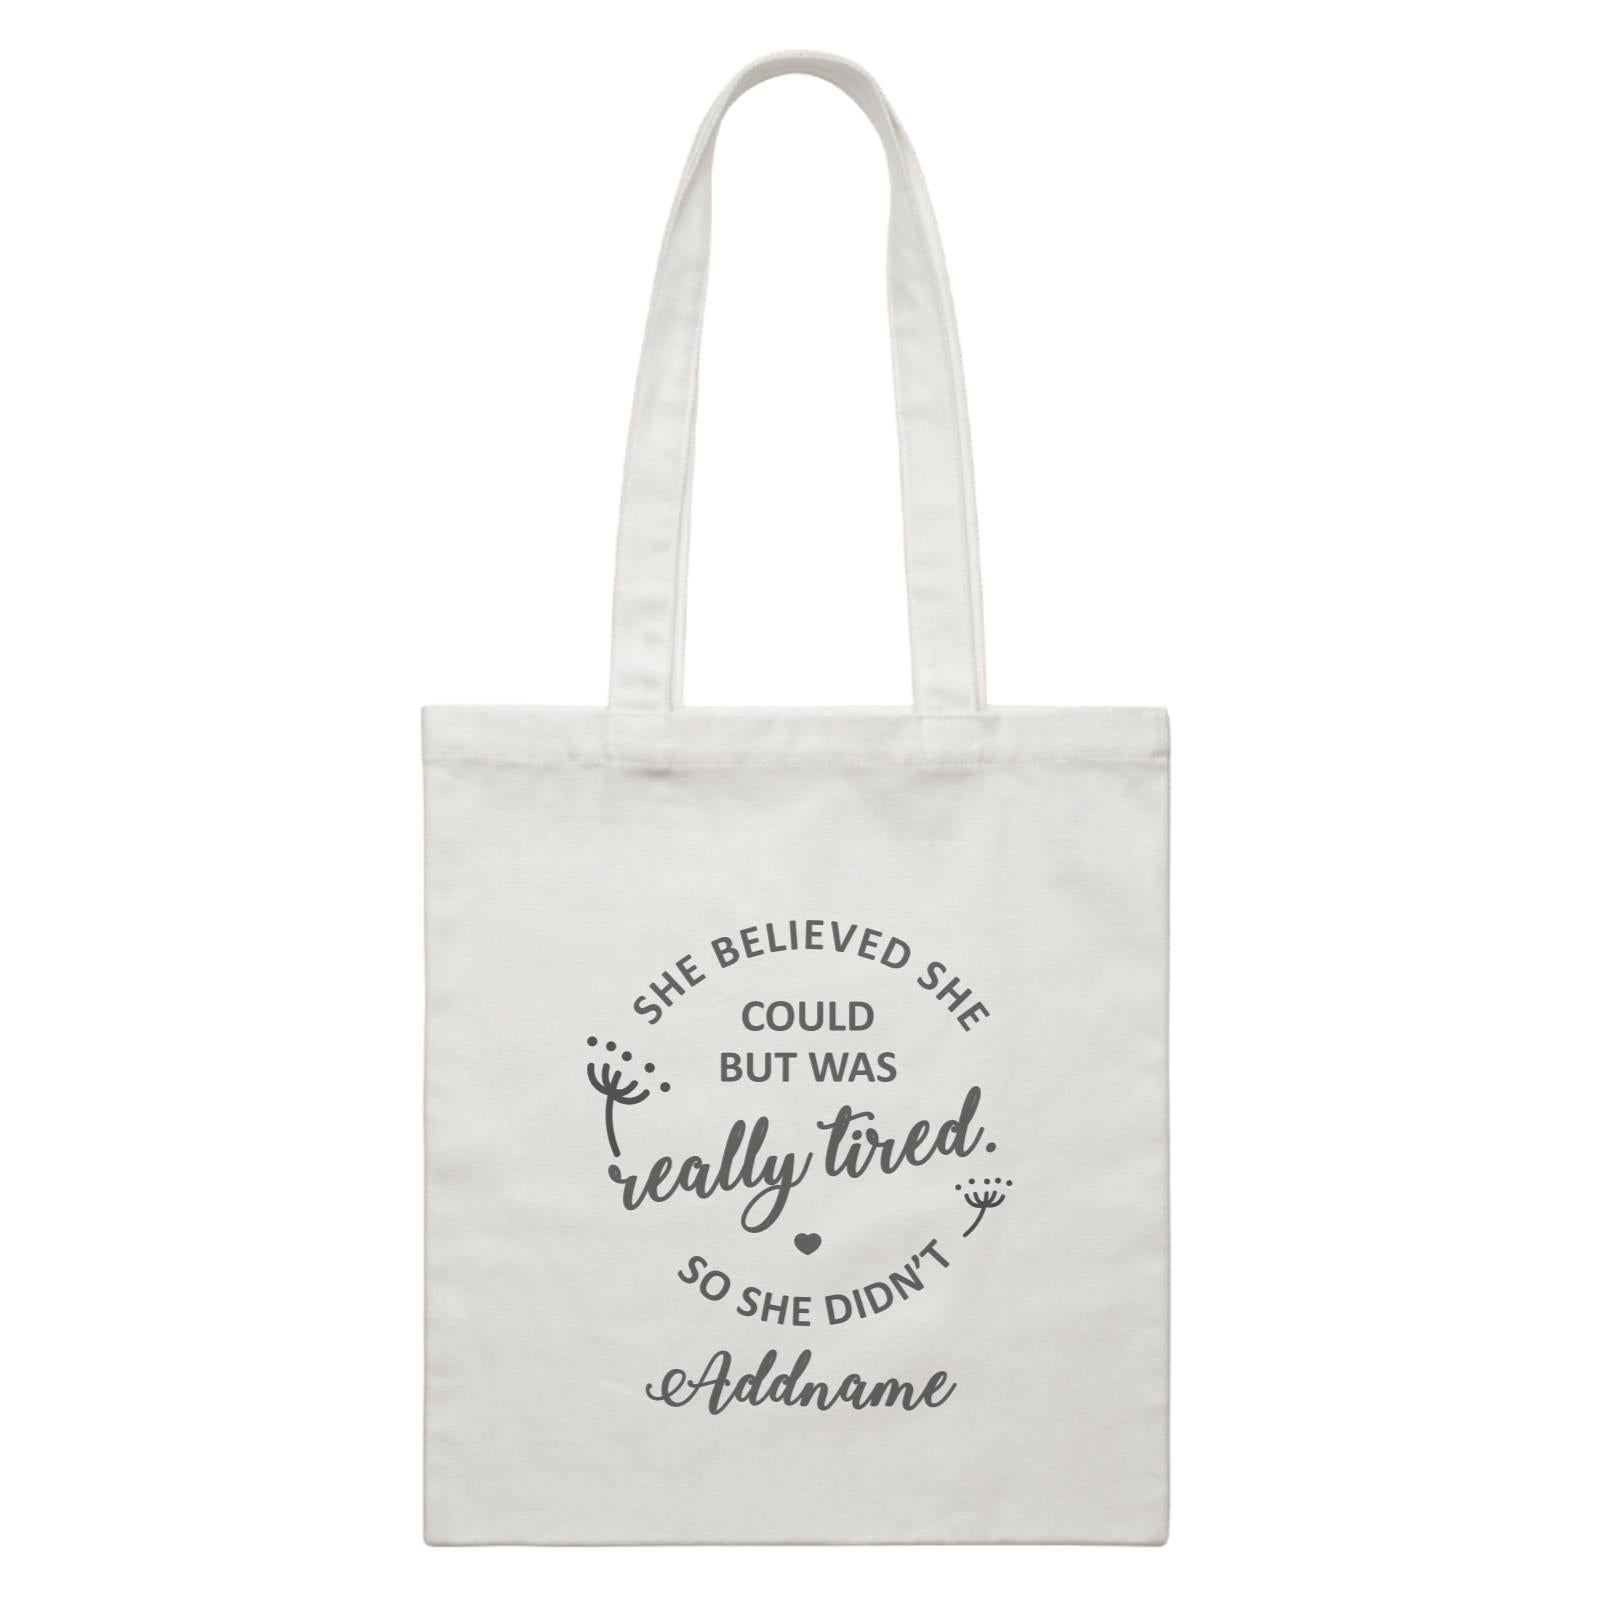 Funny Mom Quotes She Believed She Could But Was Really Tired So She Didnt Addname White Canvas Bag